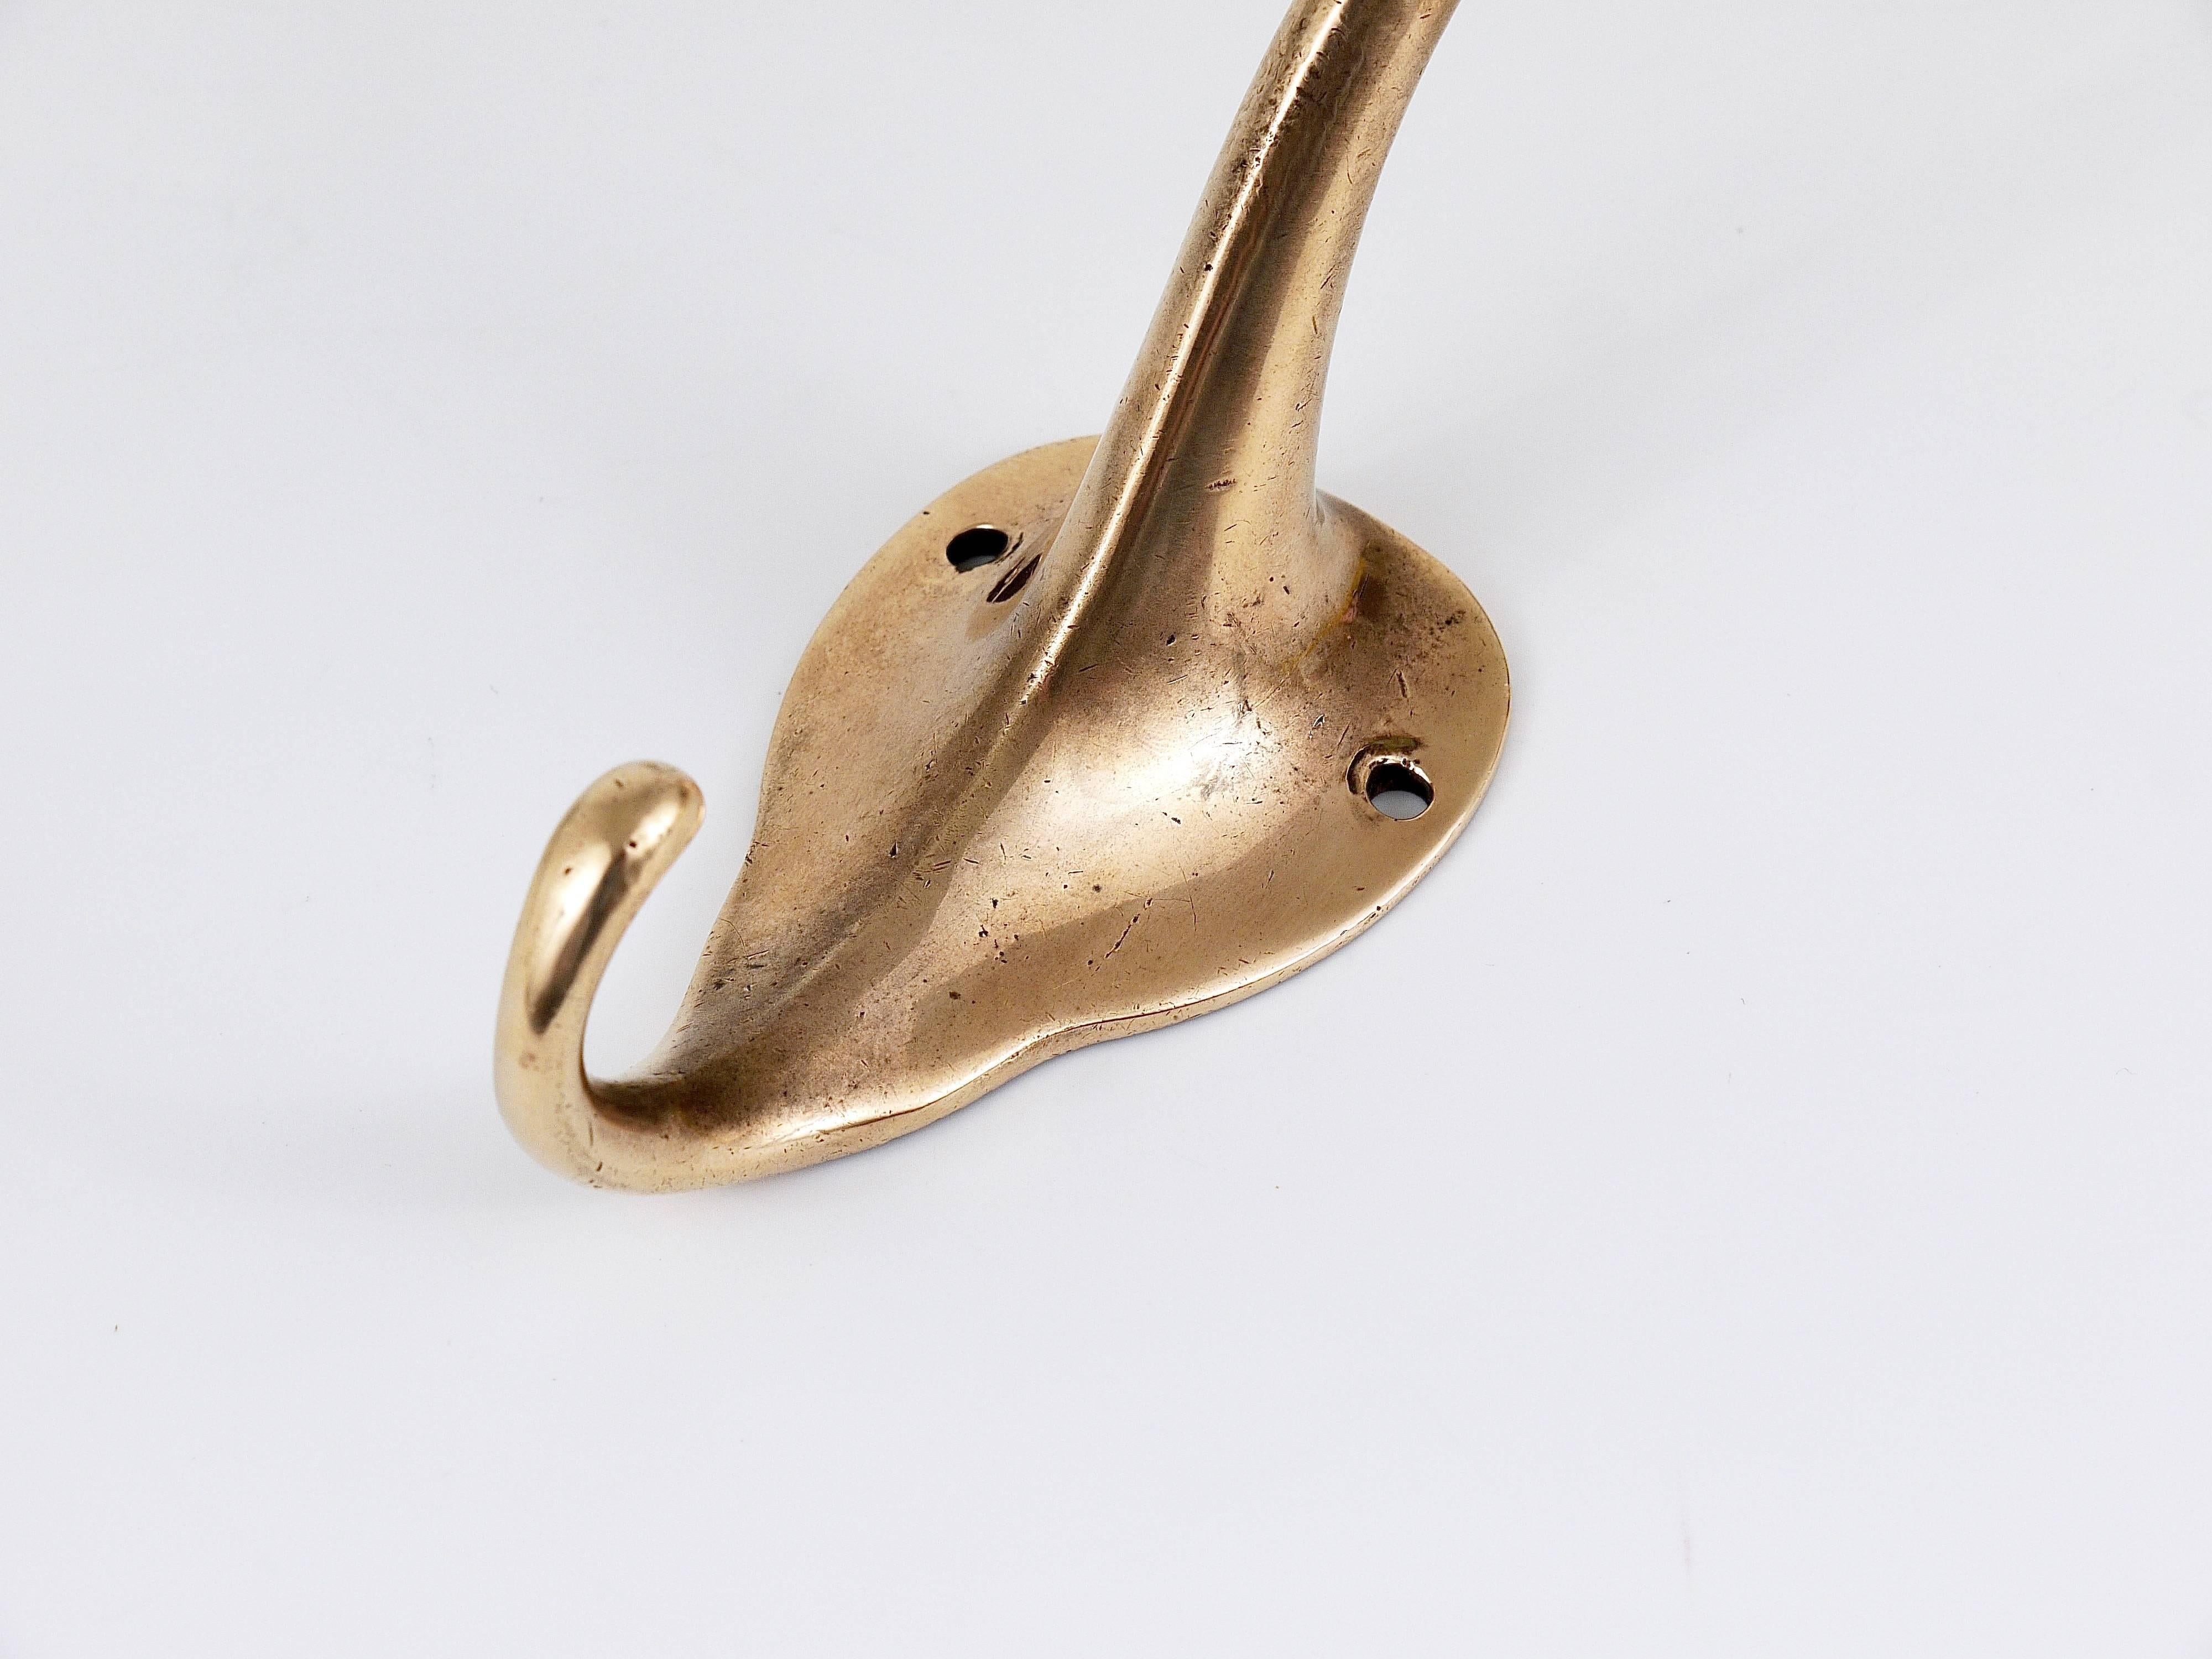 A beautiful Art Nouveau brass wall coat hook designed by Adolf Loos, executed by Werkstätte Hagenauer, Vienna, 1910. In good condition with charming patina.